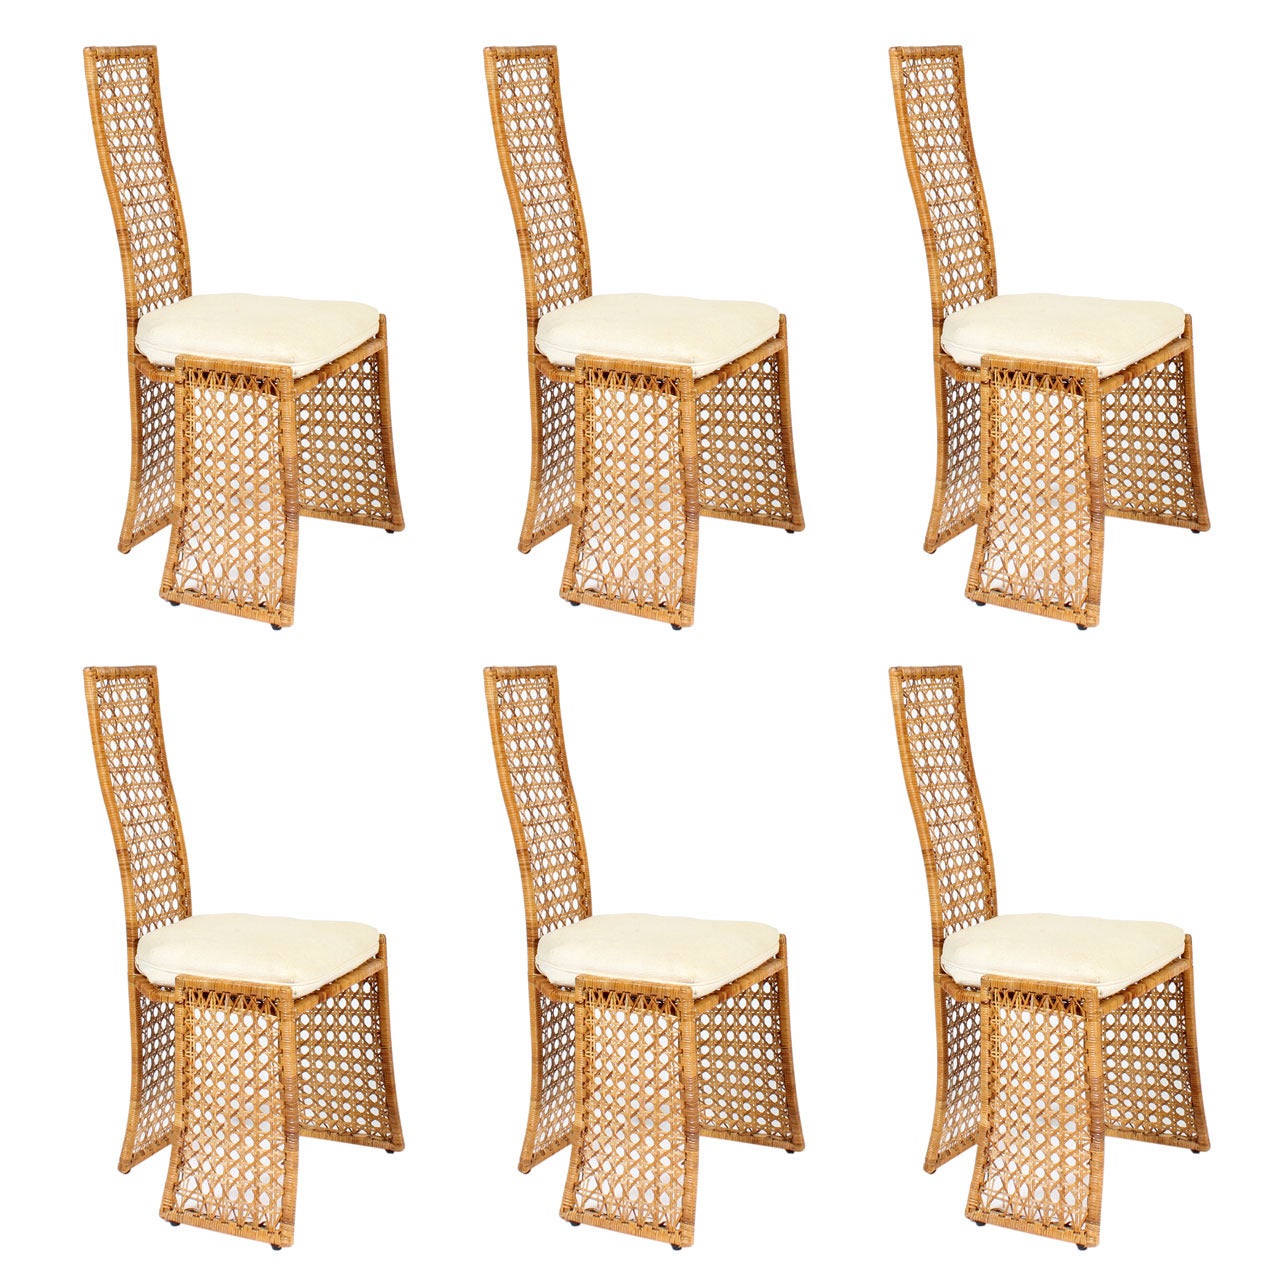 Set of 6 Modern Design Cane or Wicker Side Chairs